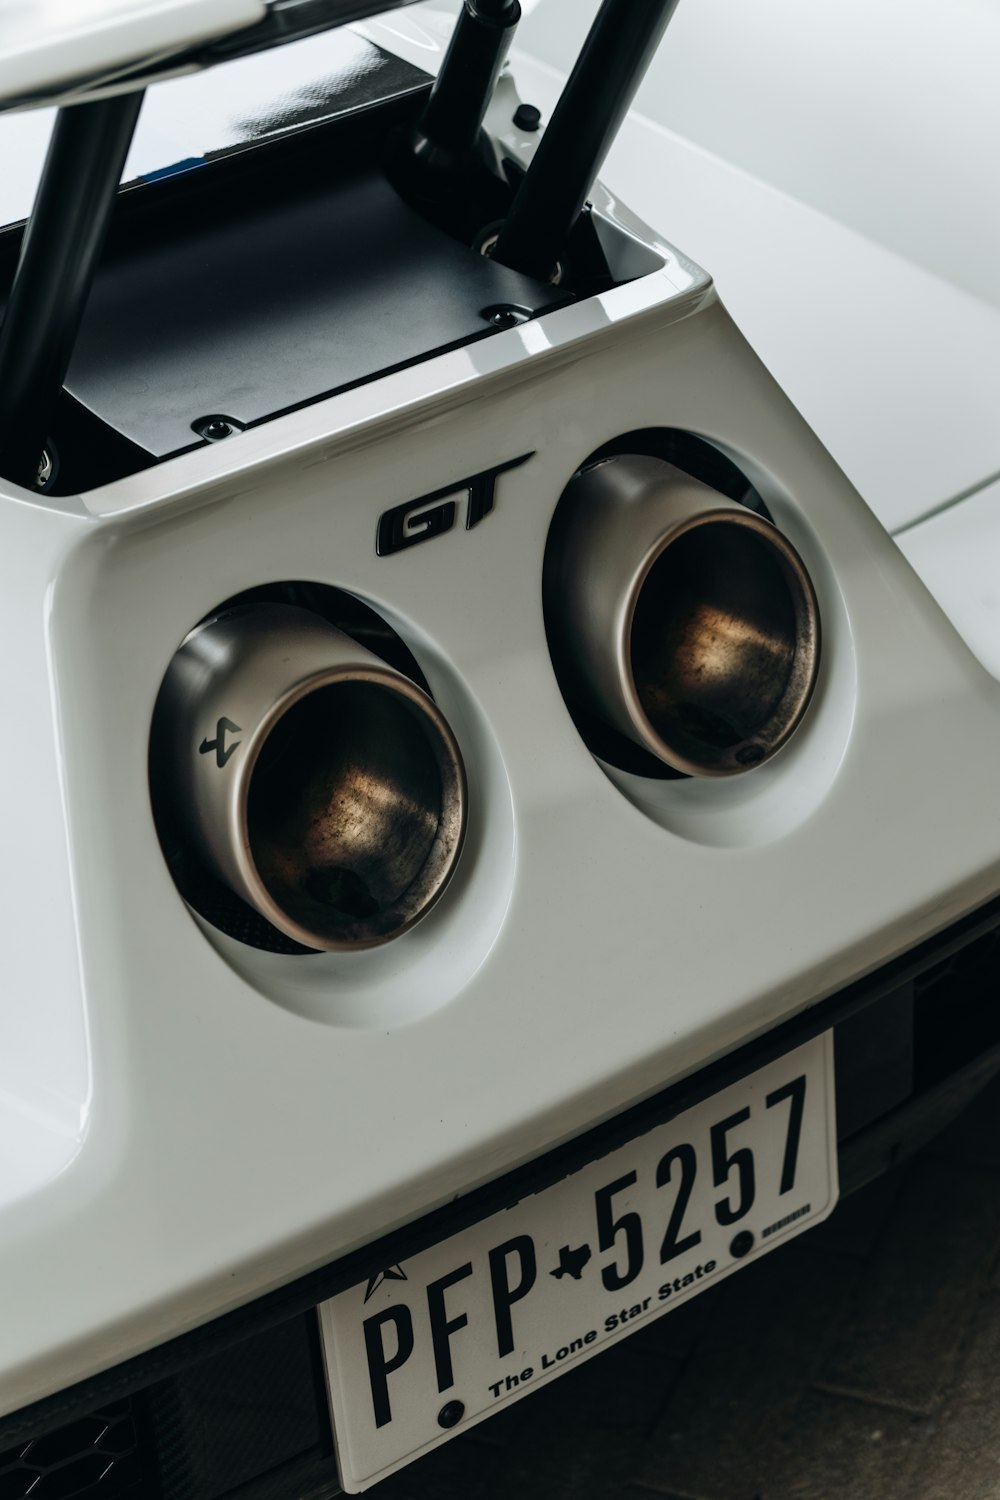 a close up of a white car with two speakers